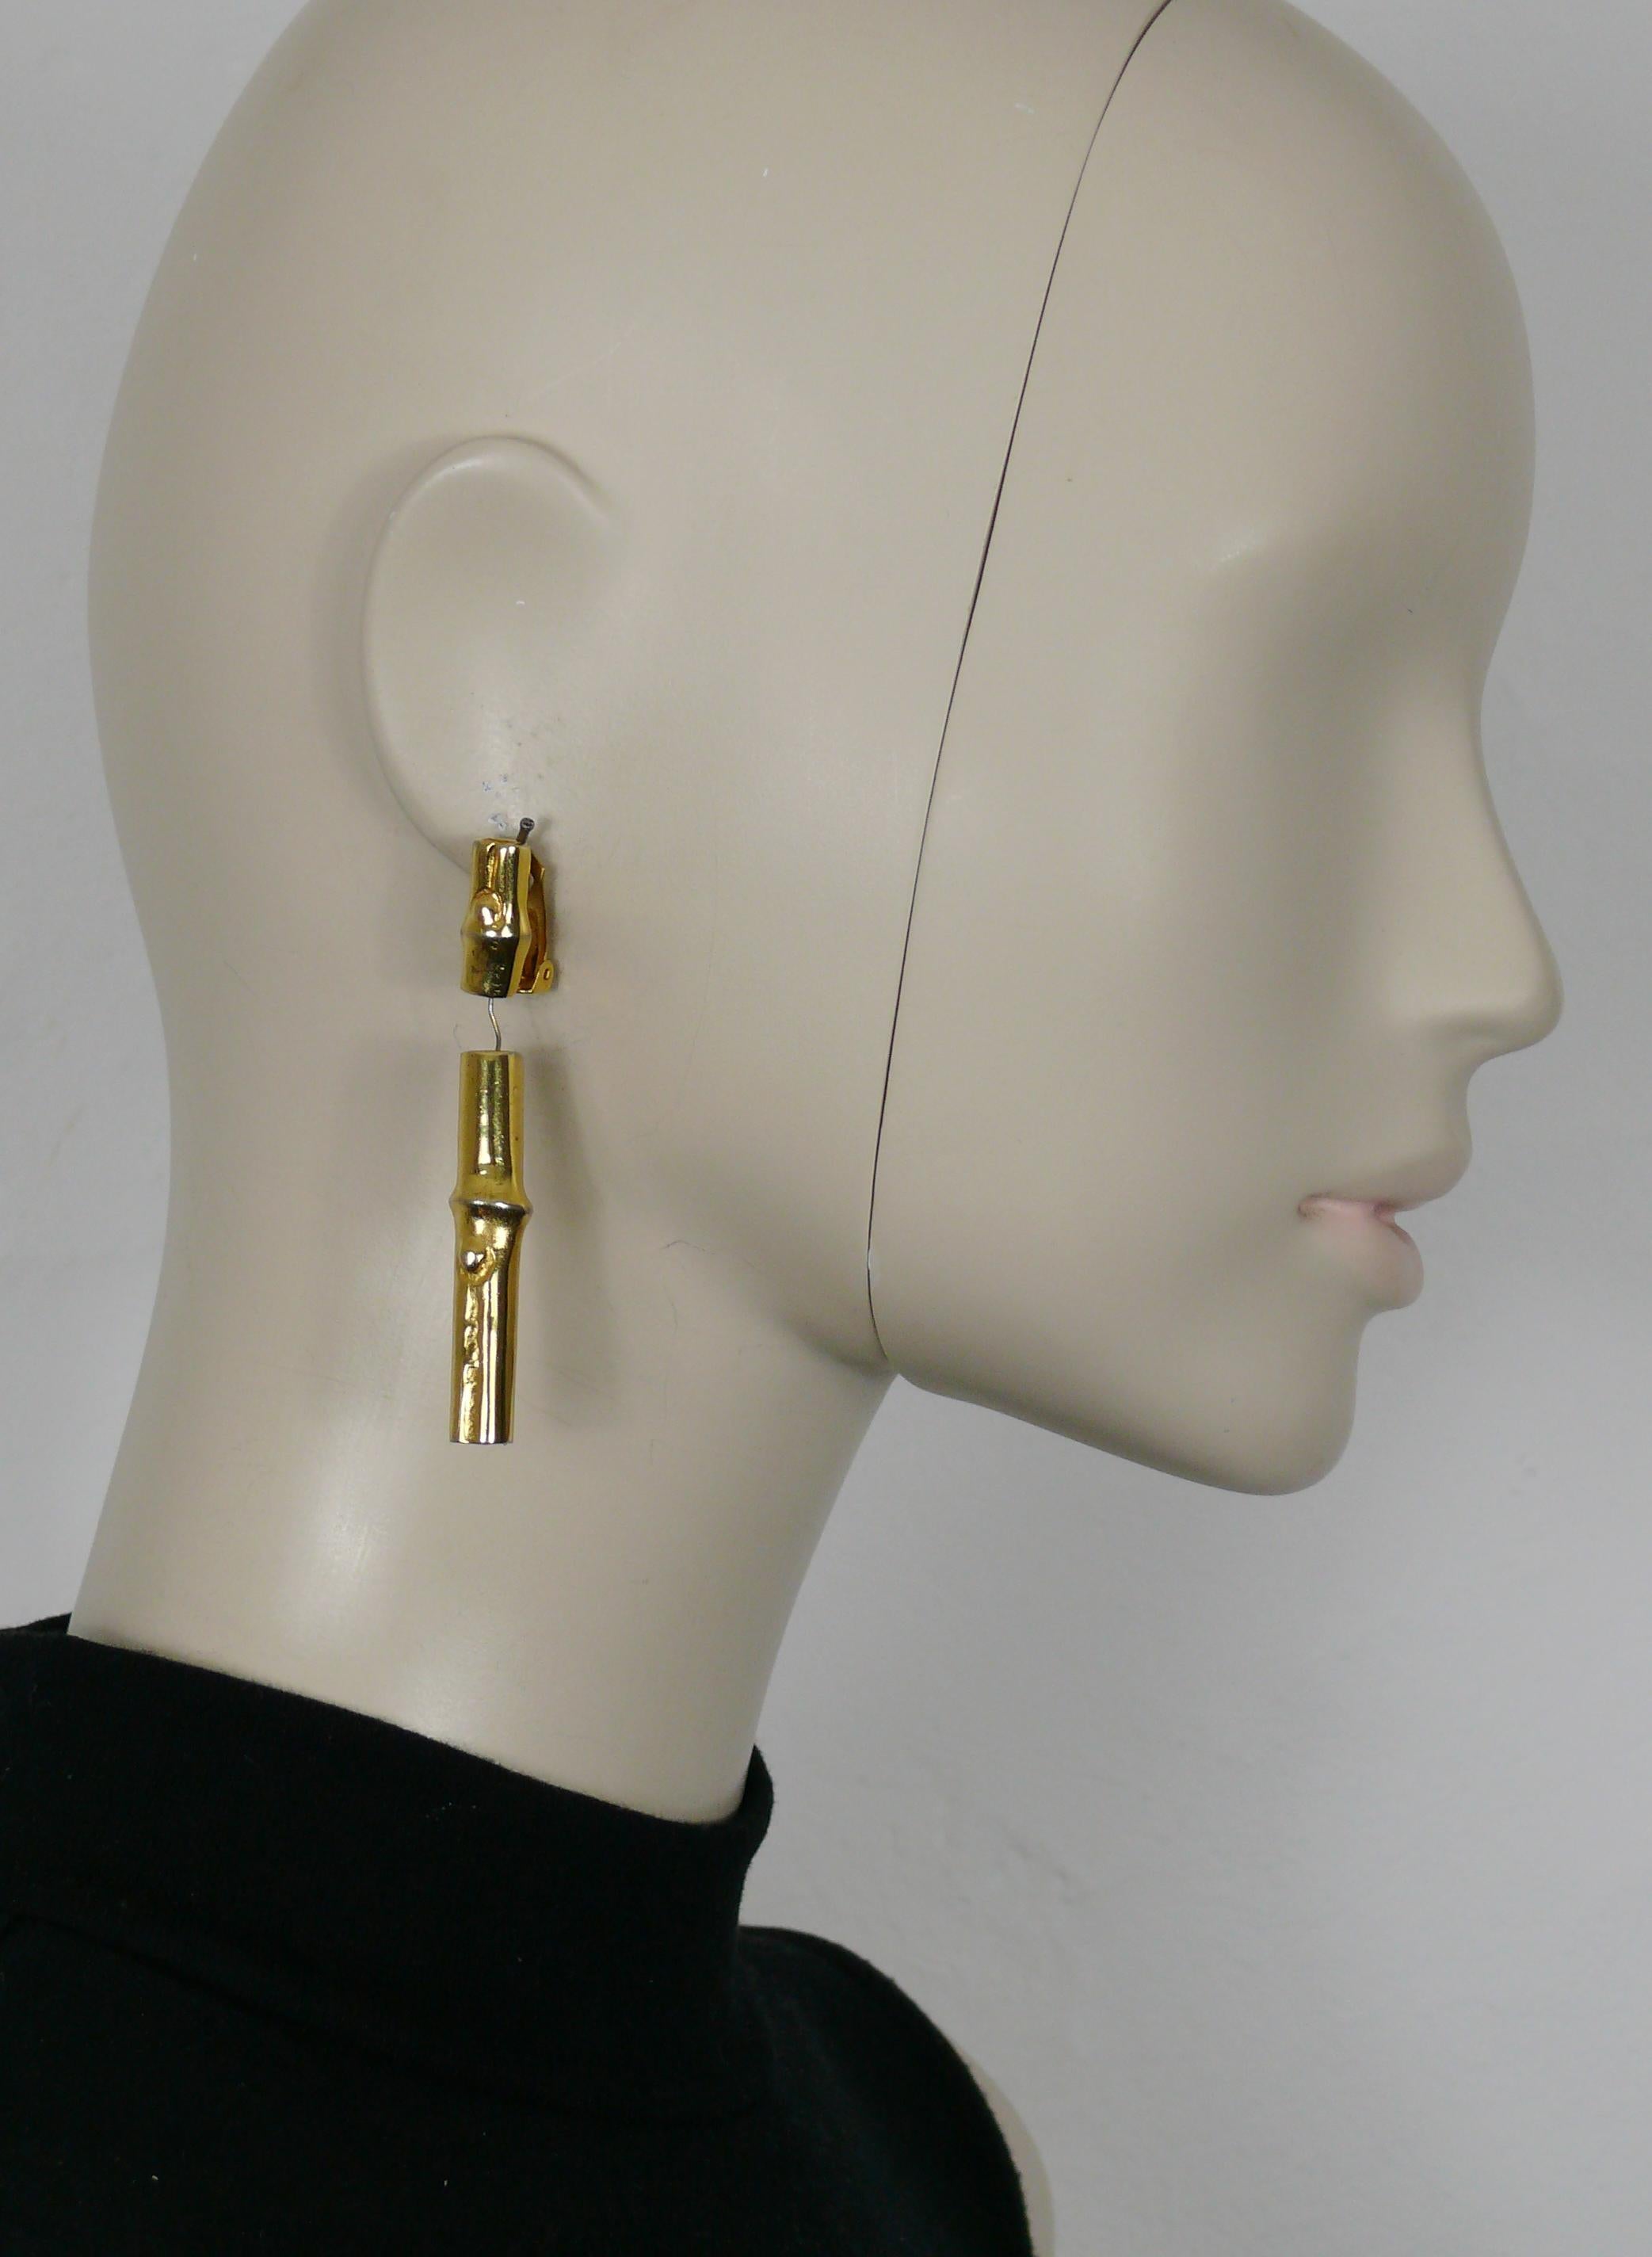 HERMES vintage rare gold tone dangling earrings (clip on) featuring a bamboo design.

Embossed HERMES PARIS.

Indicative measurements : max. height approx. 7.2 cm (2.83 inches) / max. width approx. 0.8 cm (0.31 inch).

Material : Gold tone metal